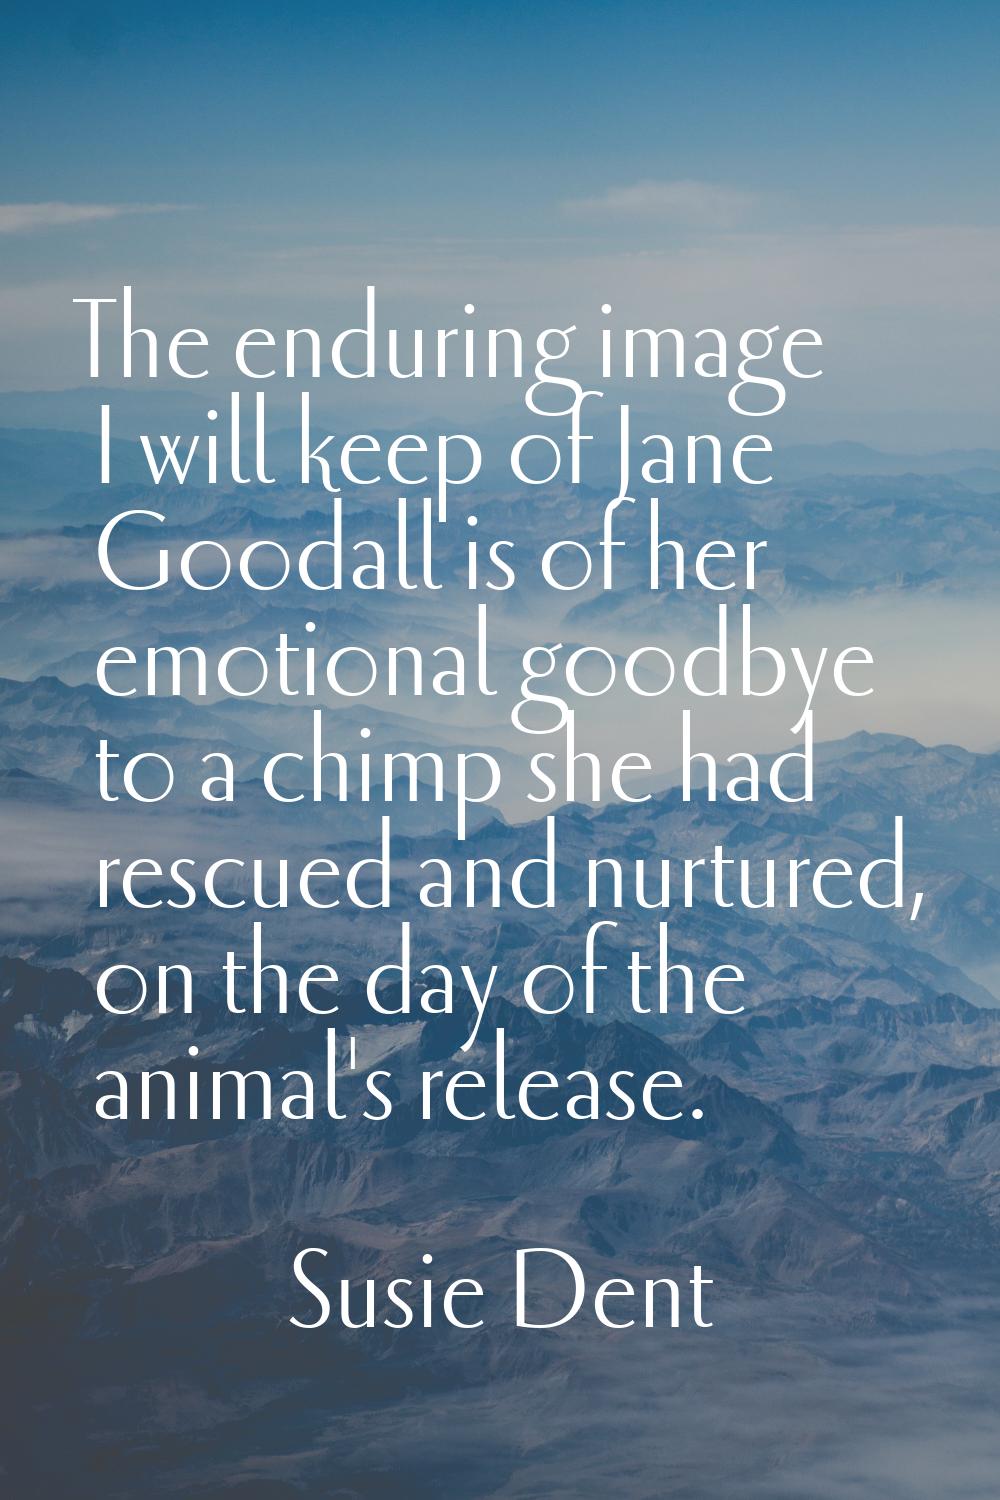 The enduring image I will keep of Jane Goodall is of her emotional goodbye to a chimp she had rescu